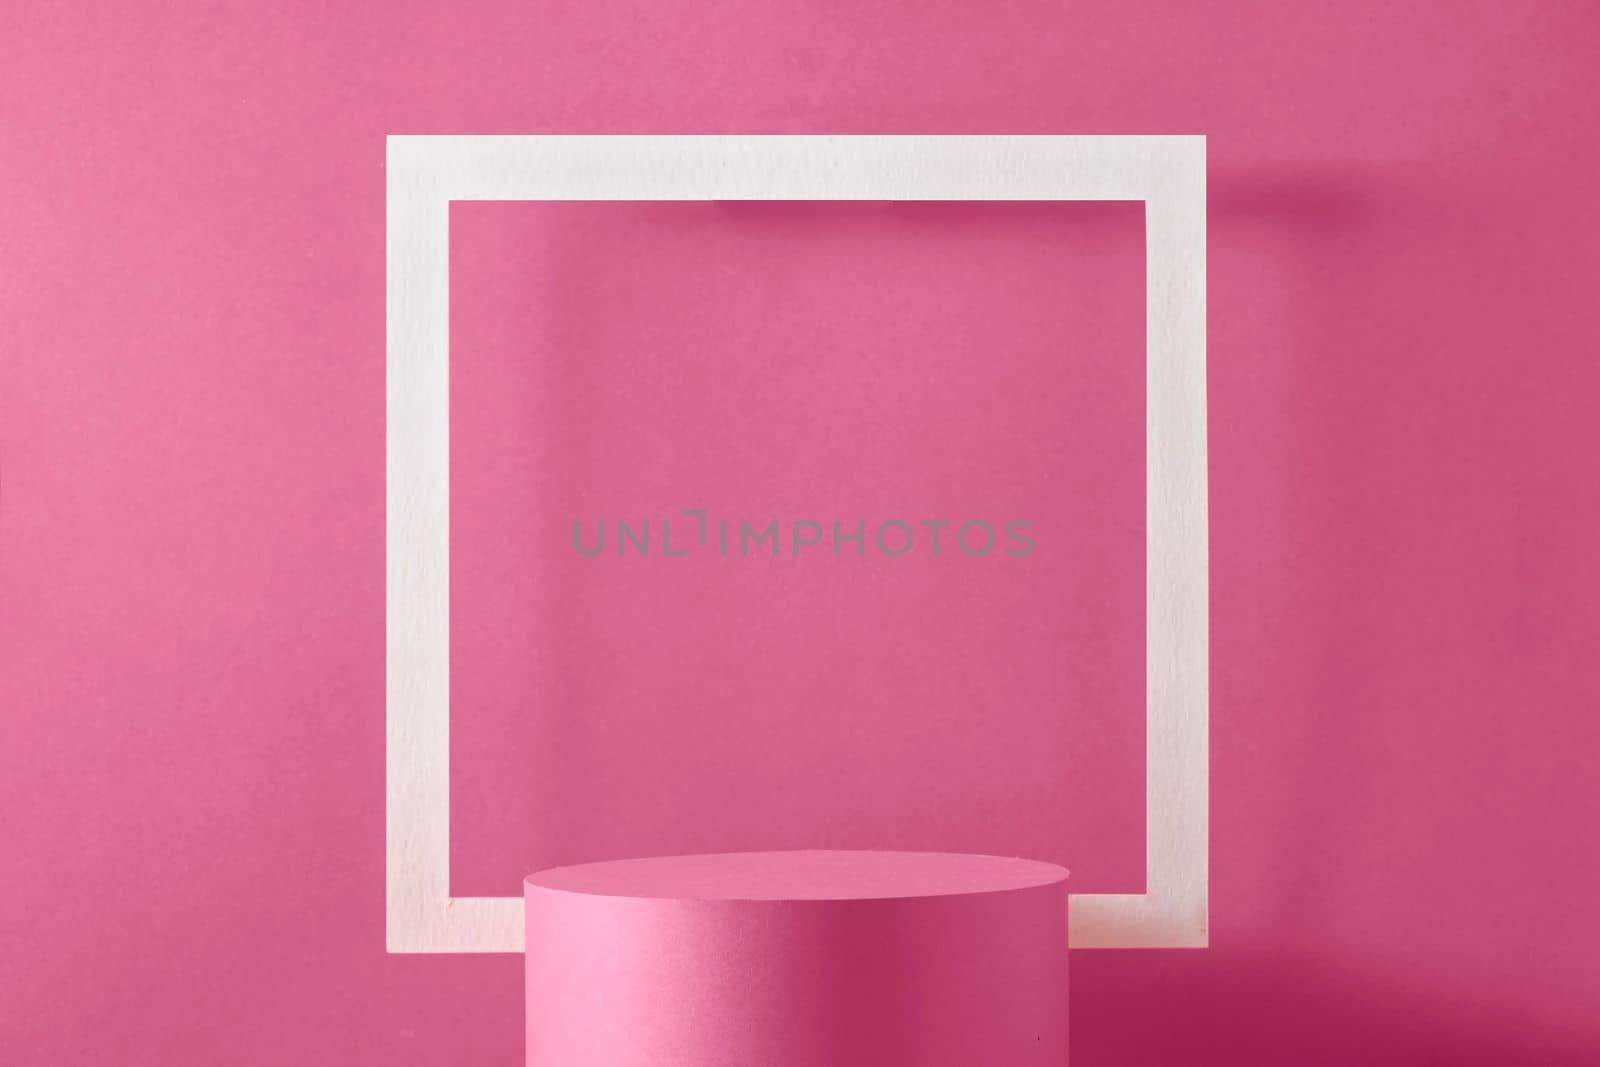 Background podium frame for showing and demonstrating the product of the Magenta trend color. High quality photo